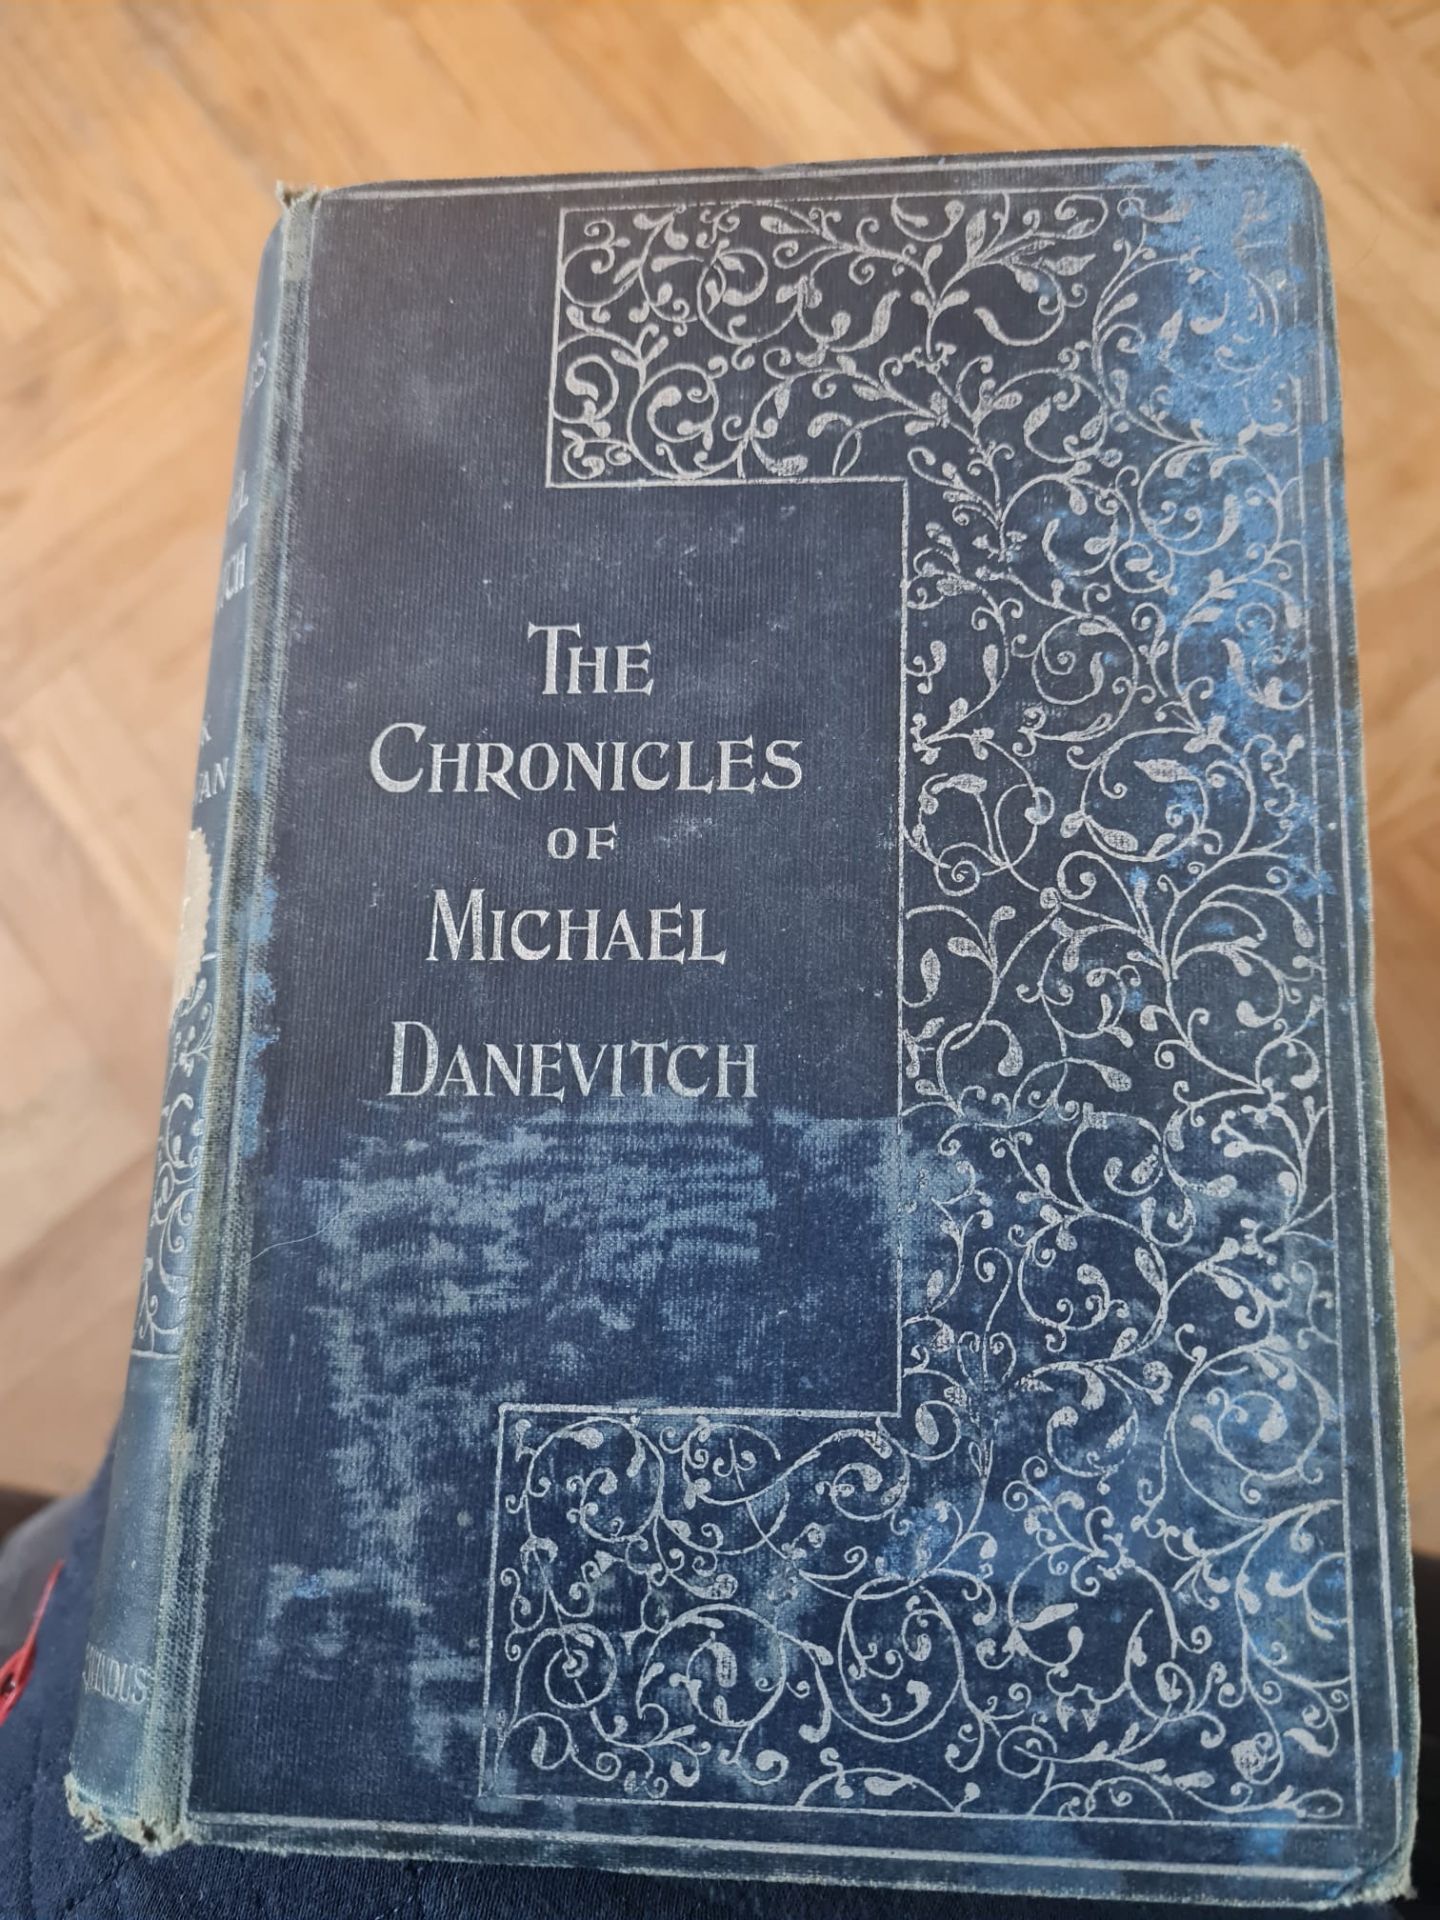 The chronicles of mixheal danevitch 1897